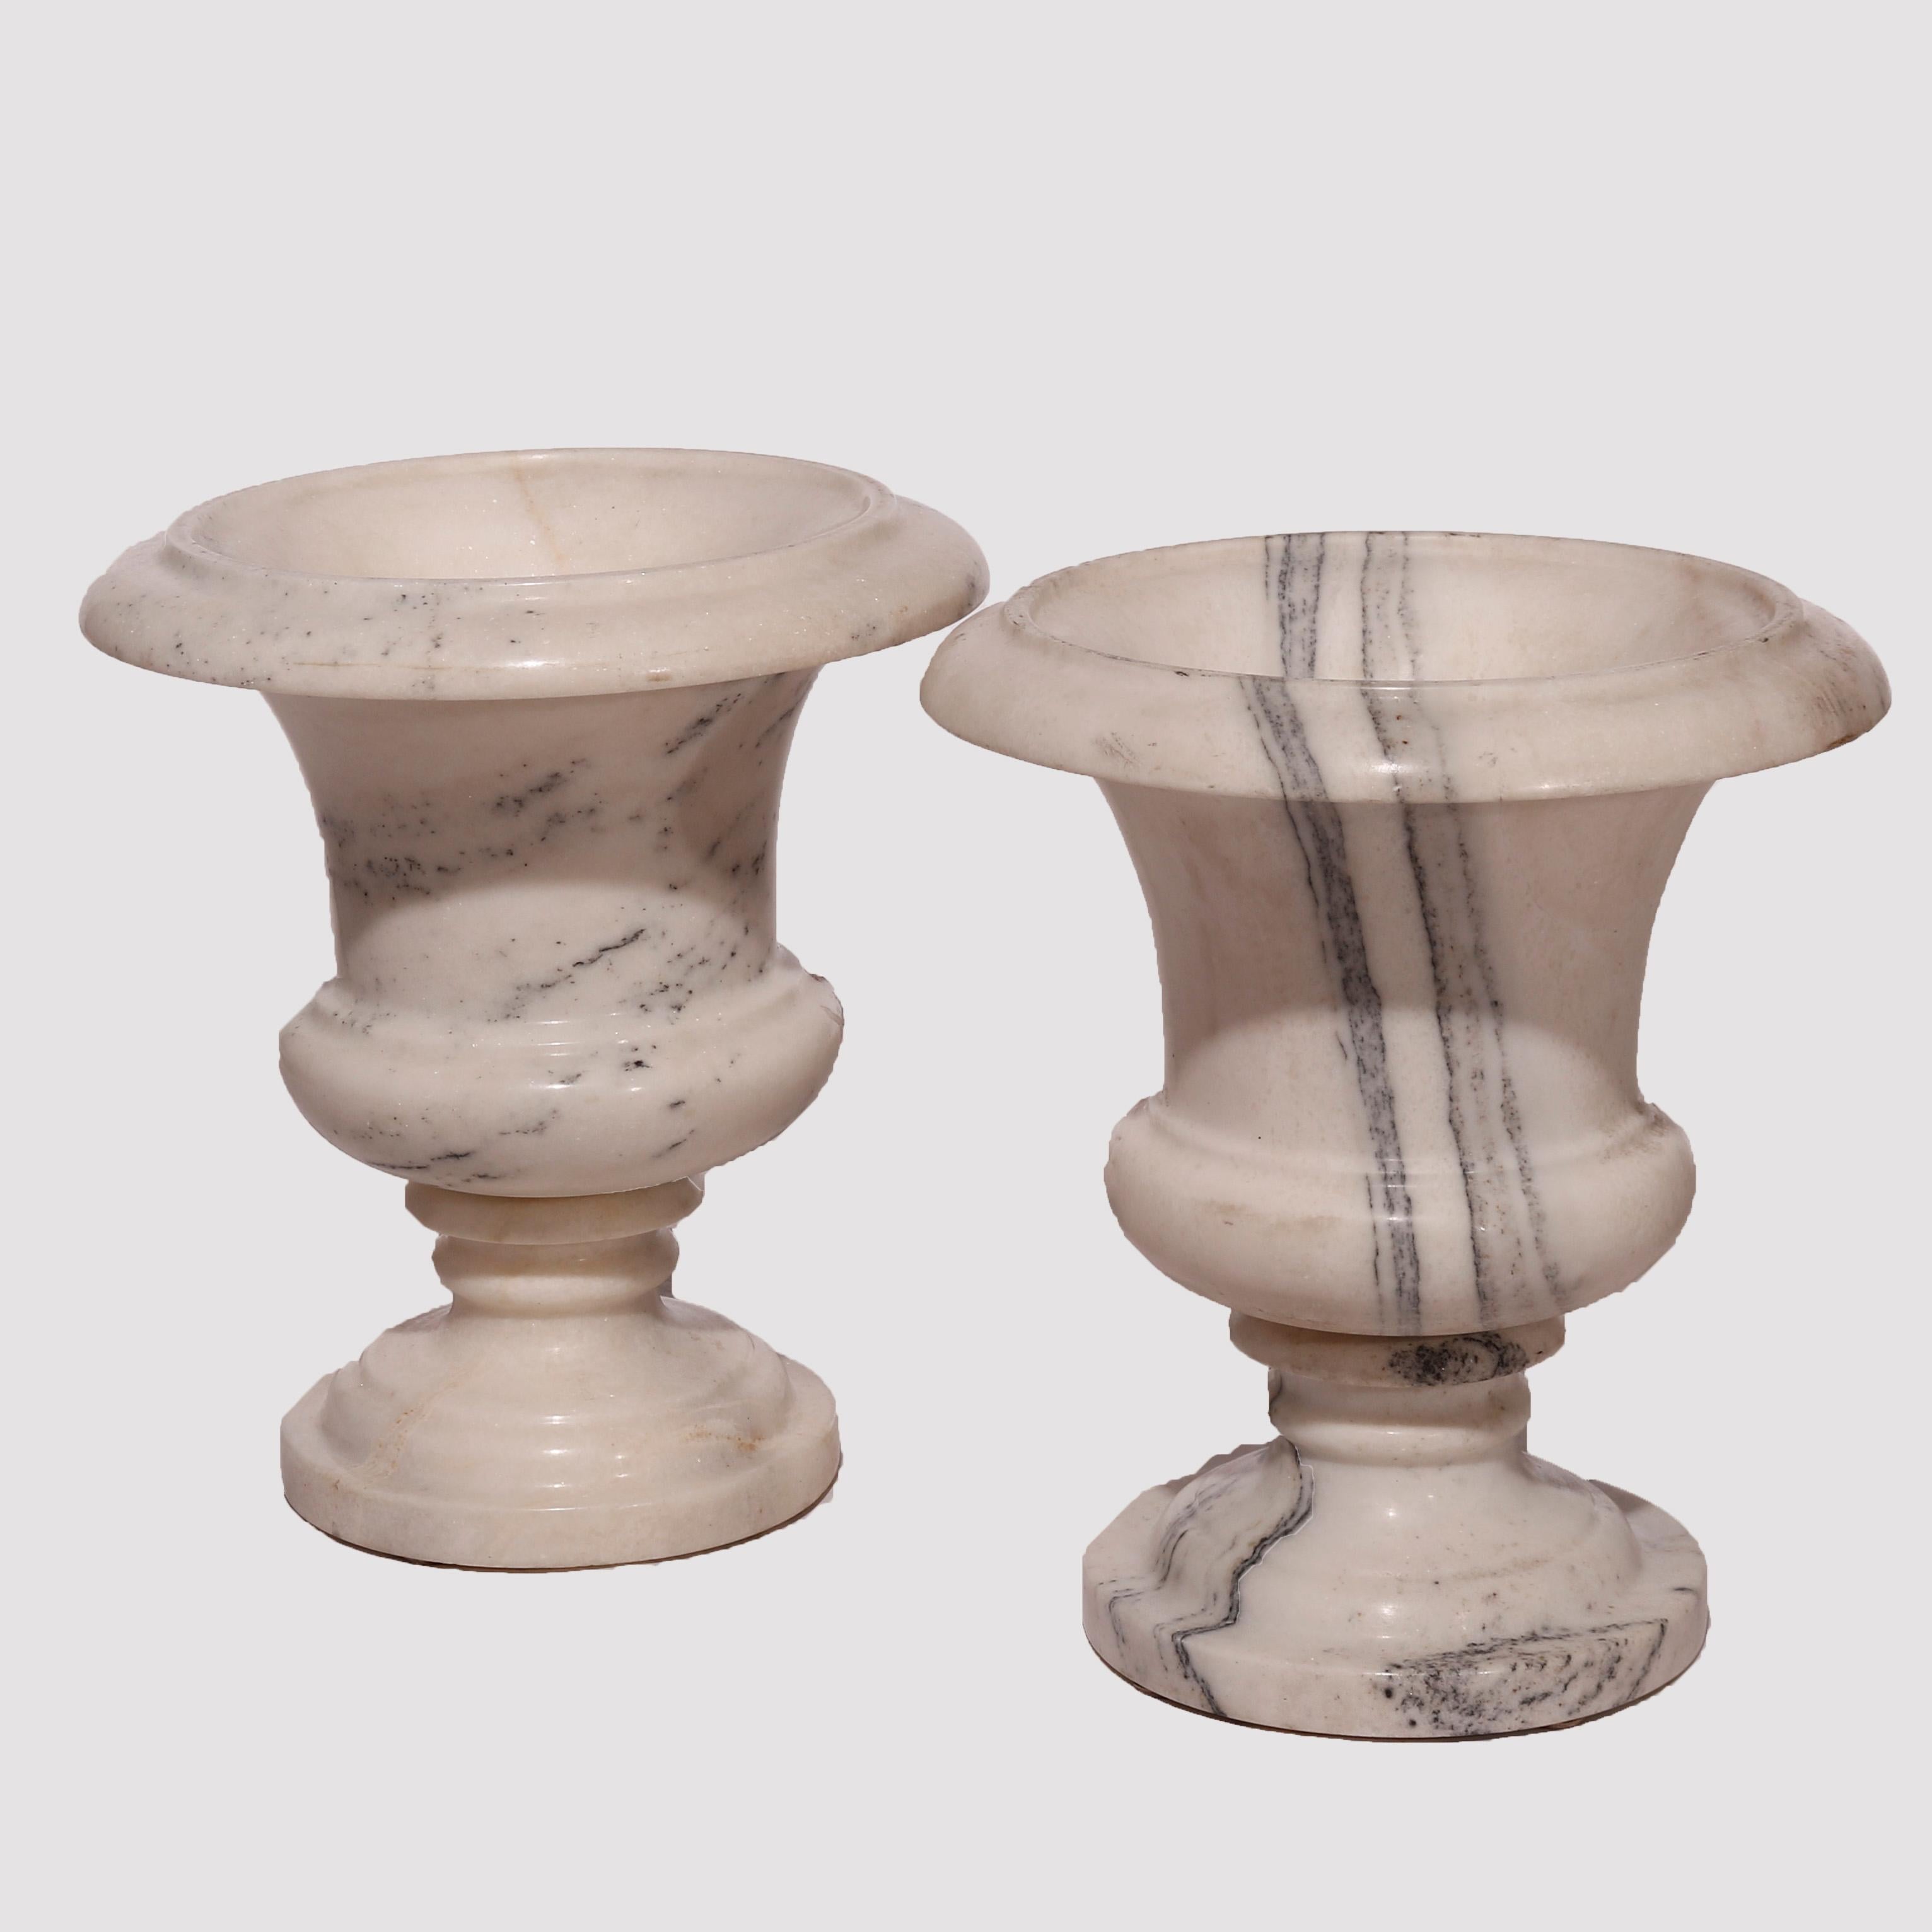 An antique pair of Neoclassical garden urns offer carved marble construction, 19th century

Measures - 17.75H x 15.75